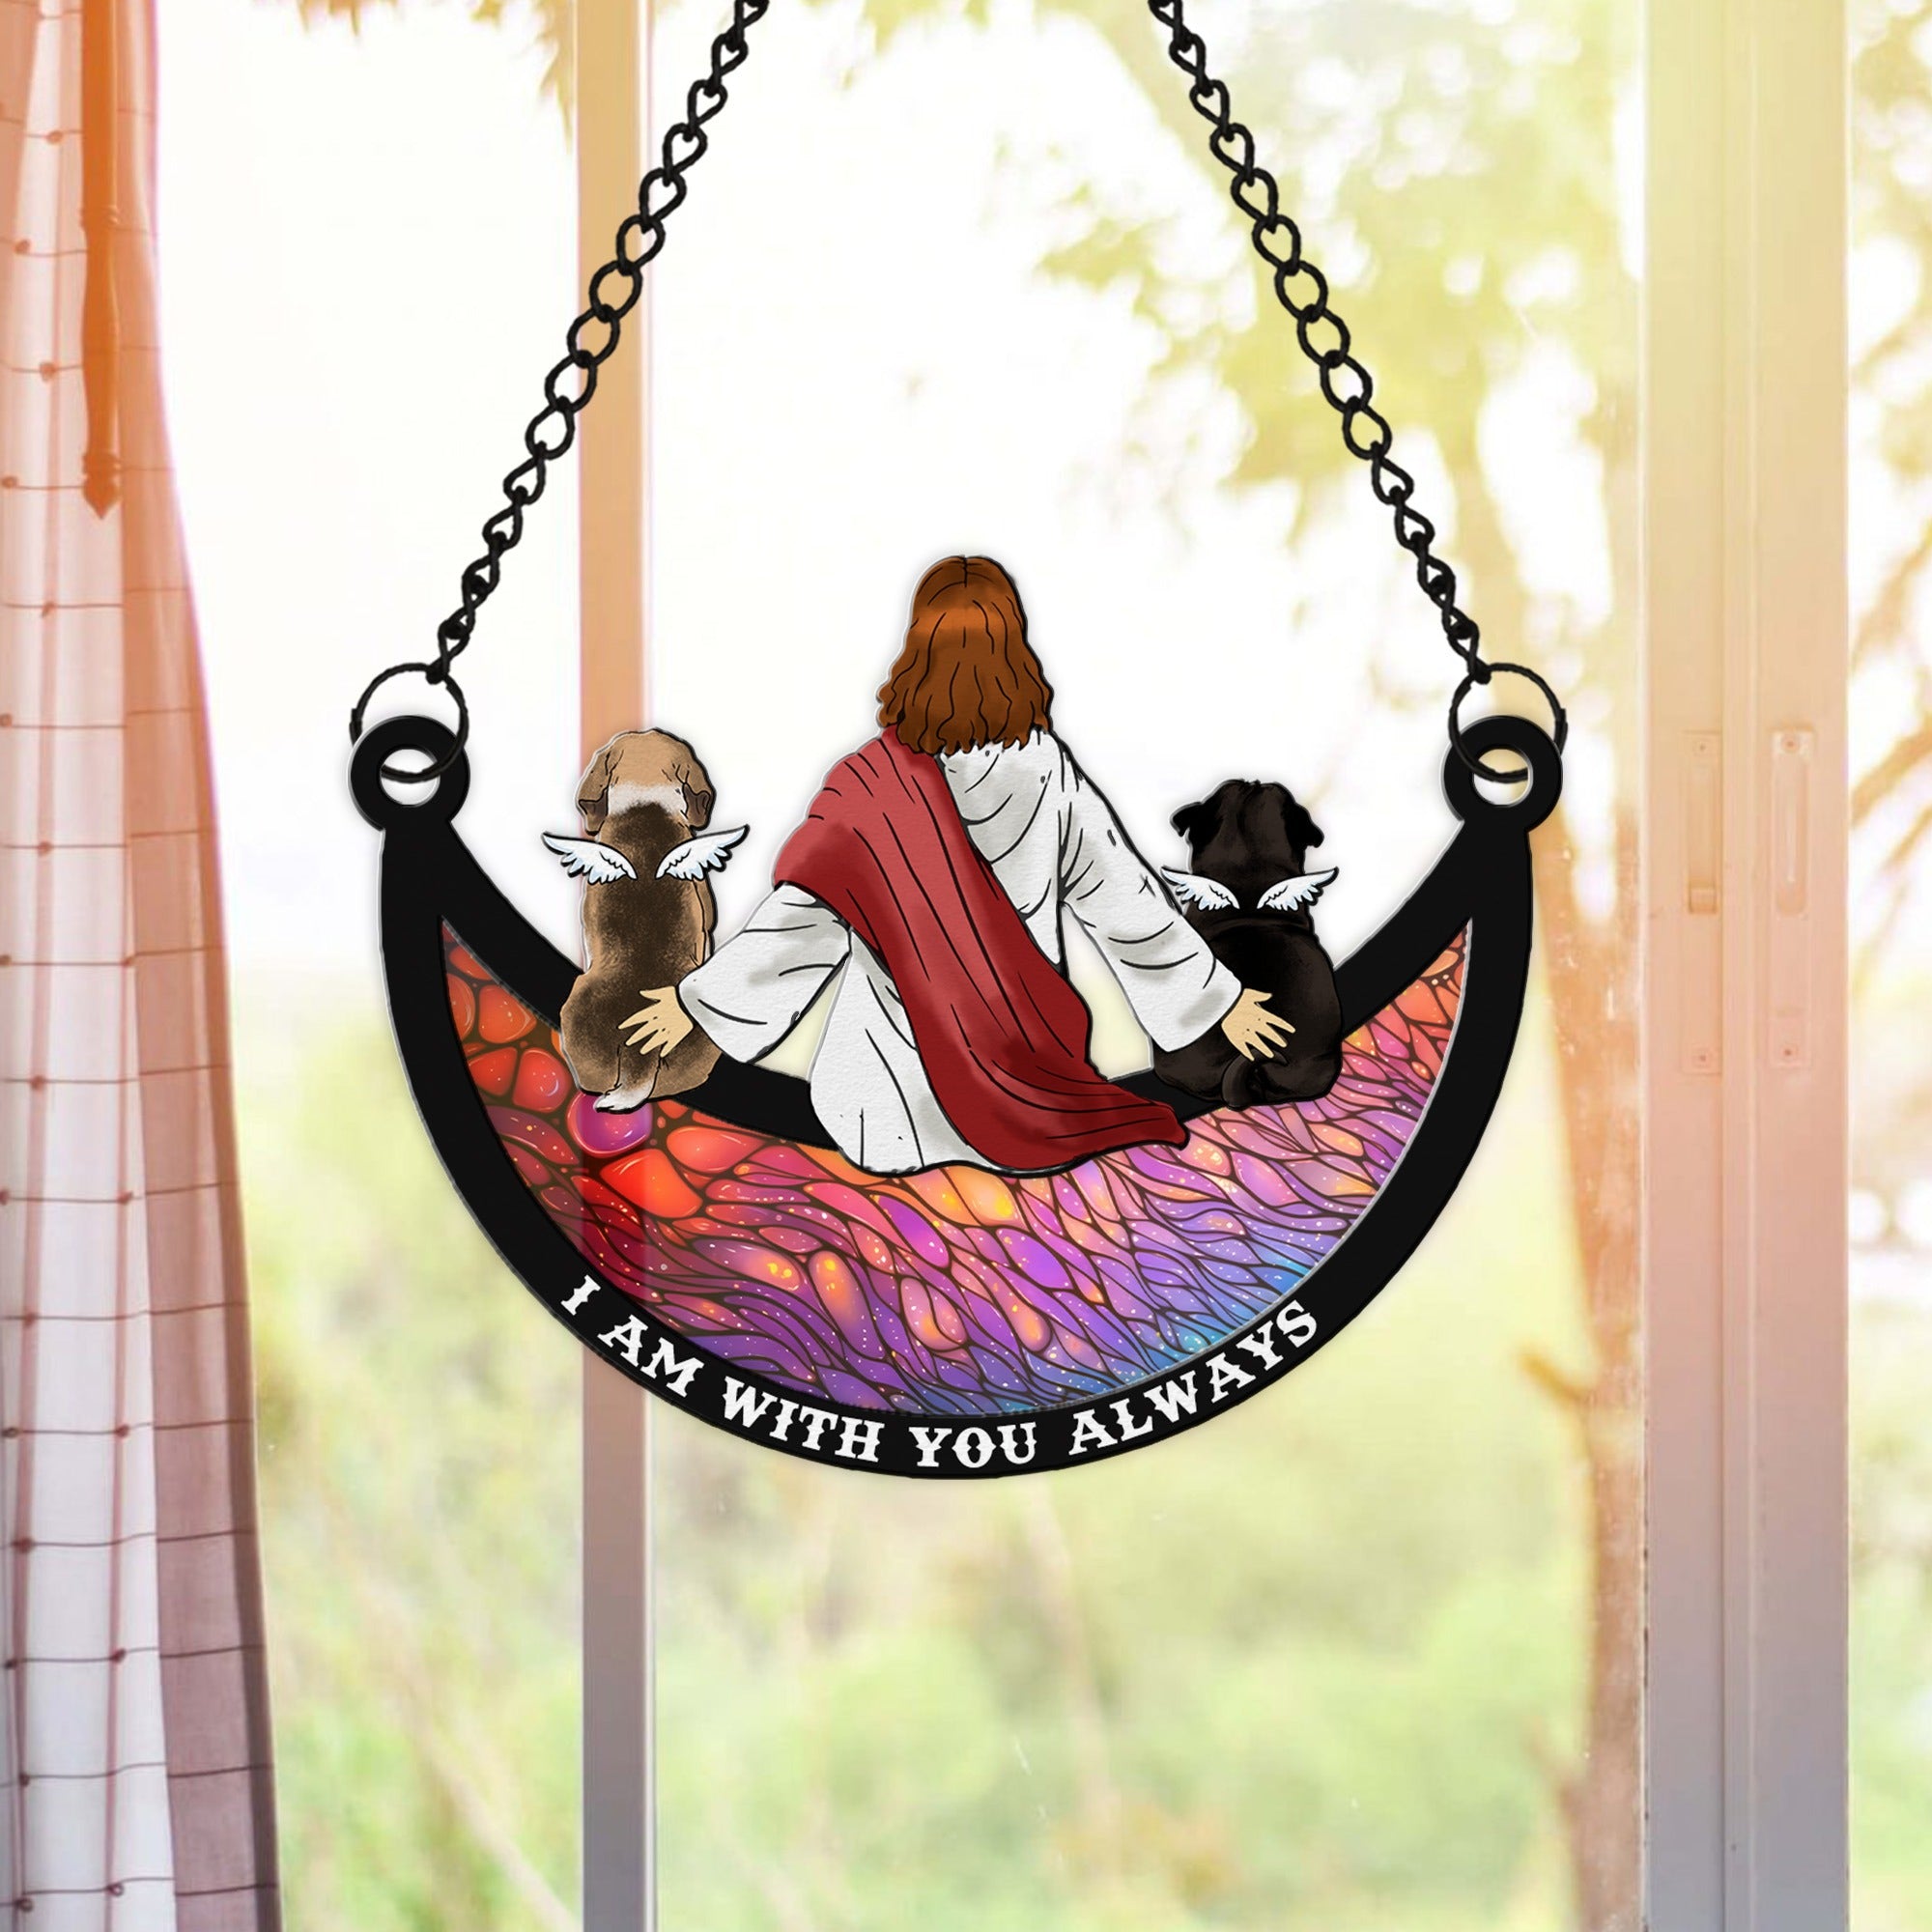 Personalized Dog Memorial With Jesus I Am With You Alway Hanging Suncatcher Ornament